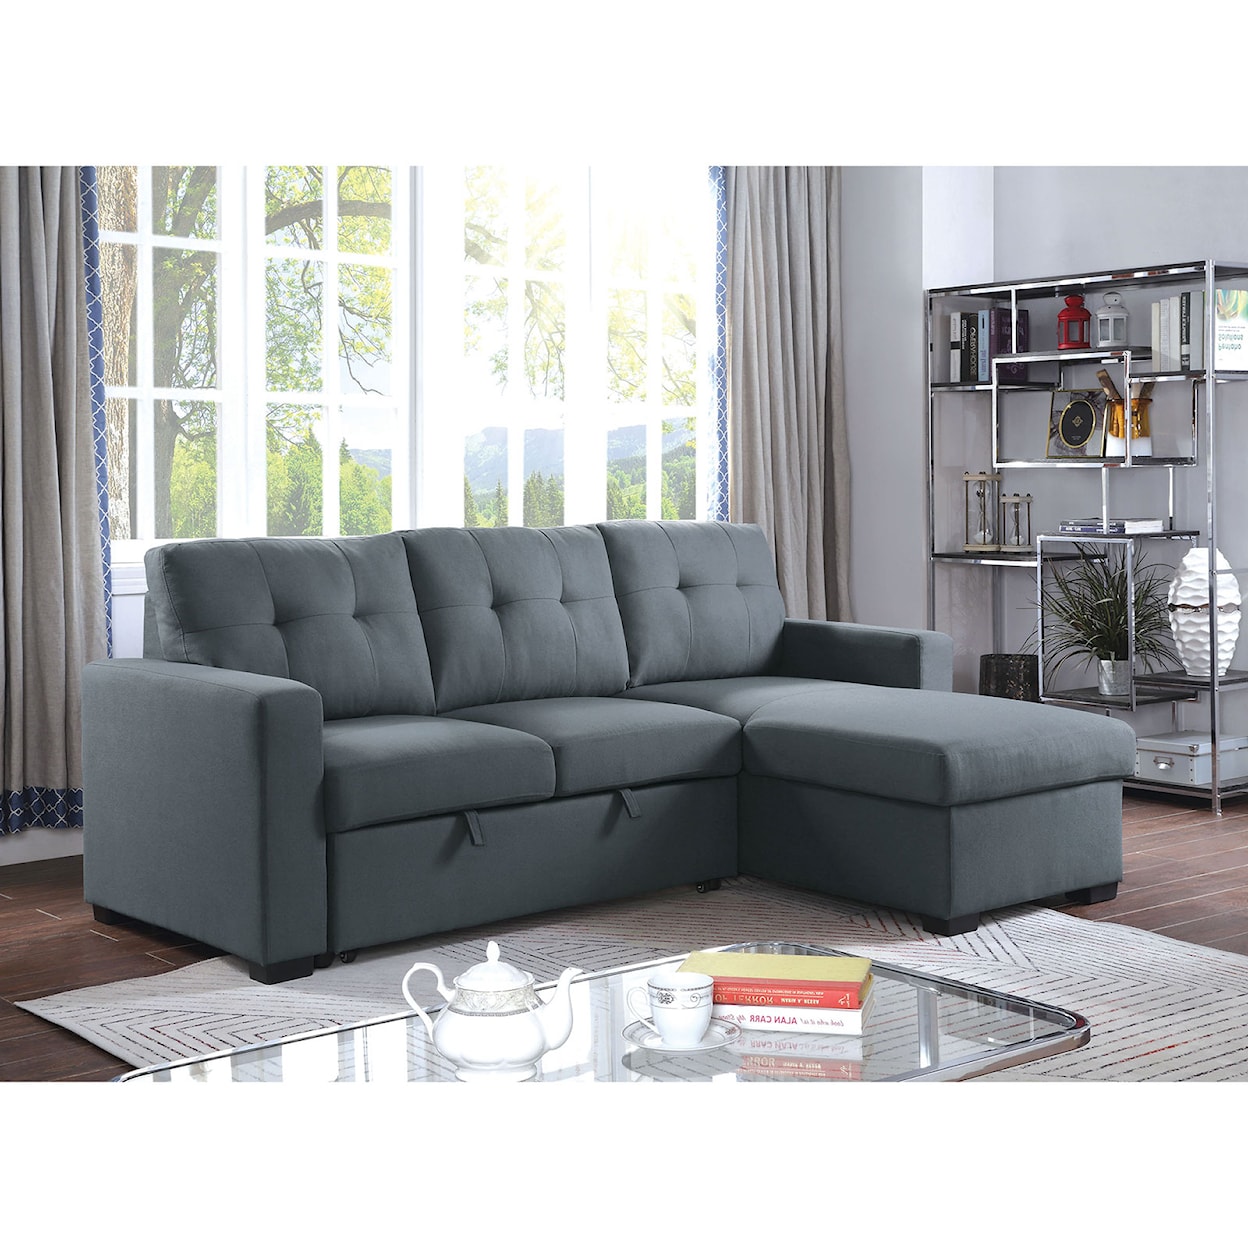 Furniture of America Jacob Sectional Sofabed Chaise